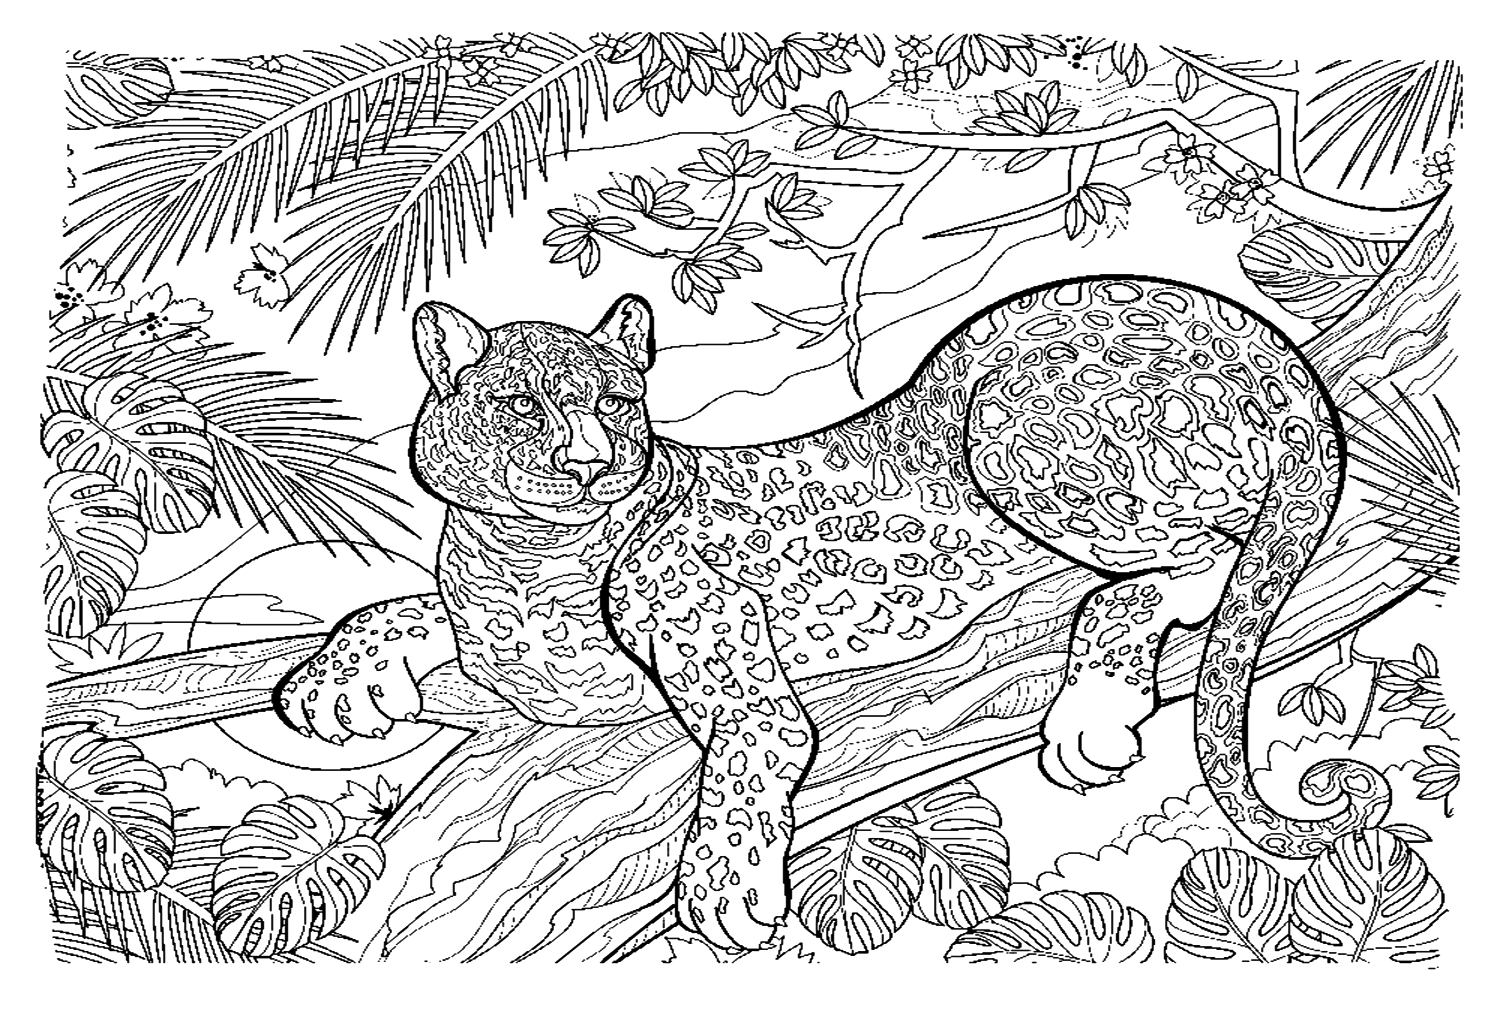 Leopard Lying In The Forest Coloring Page - Free Printable Coloring Pages